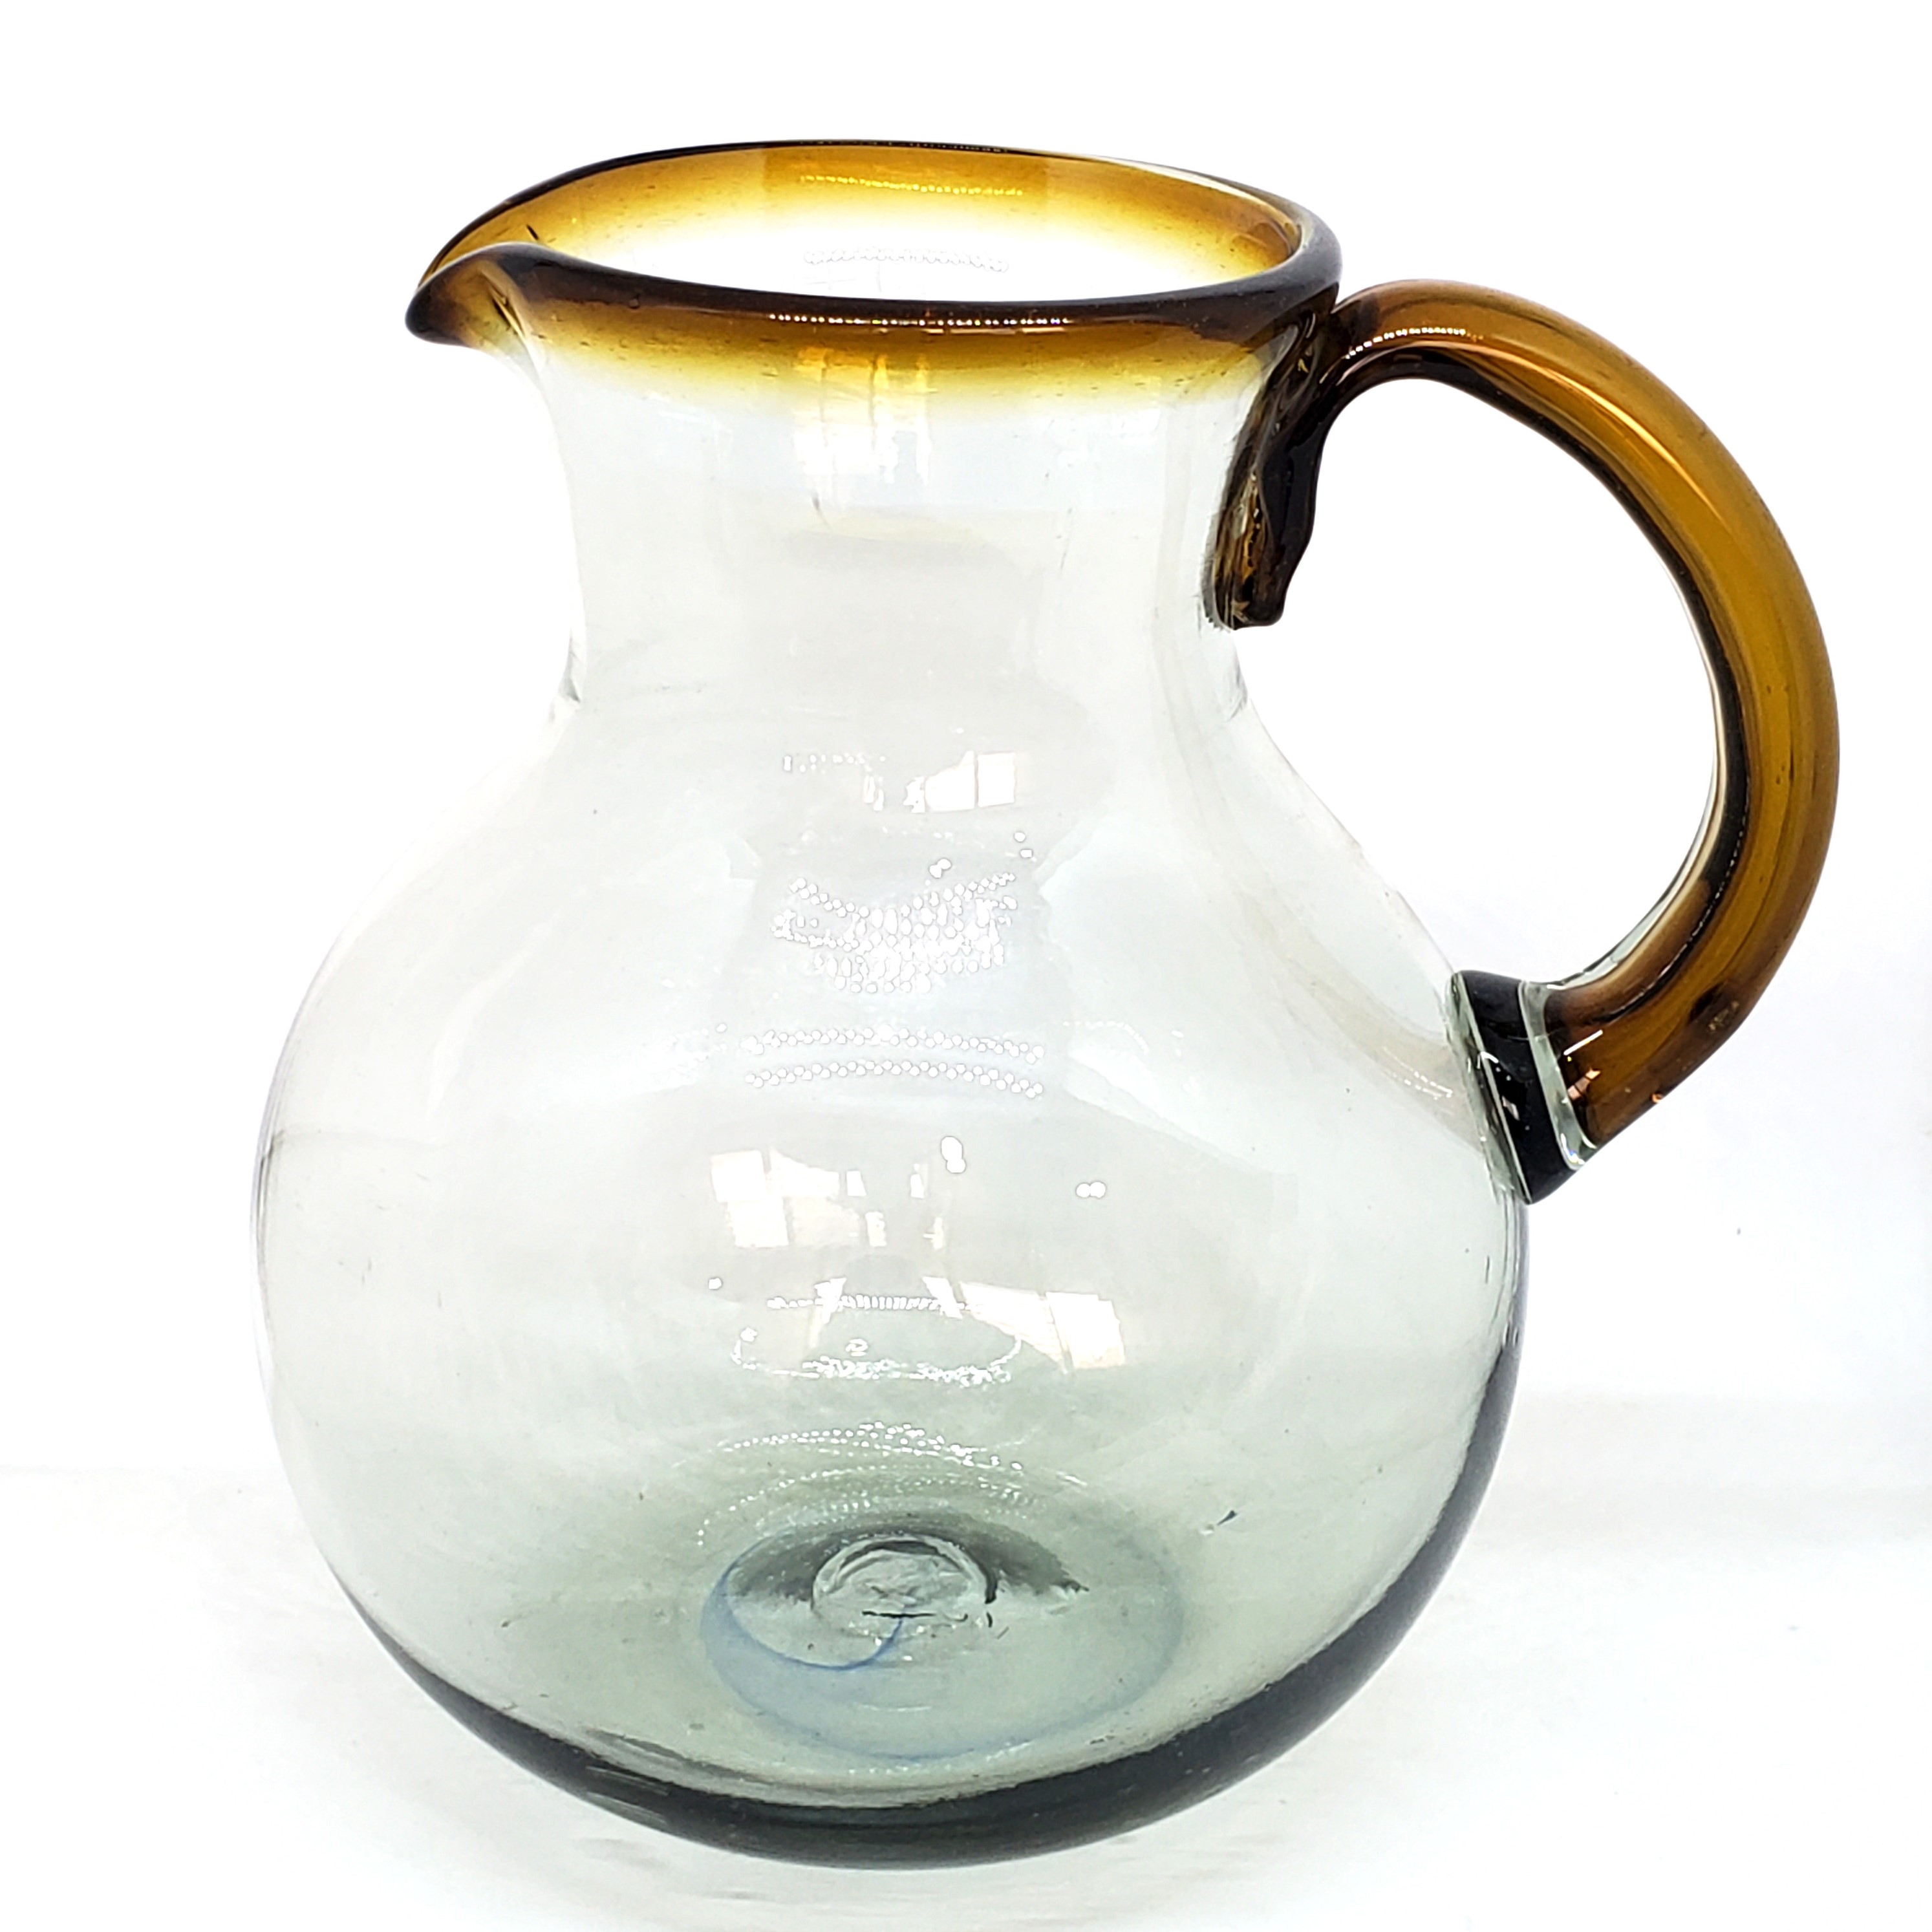 https://mexicanglassware.us/imgProducts/Amber%20Rim%20120%20oz%20Large%20Bola%20Pitcher%20(1).jpg